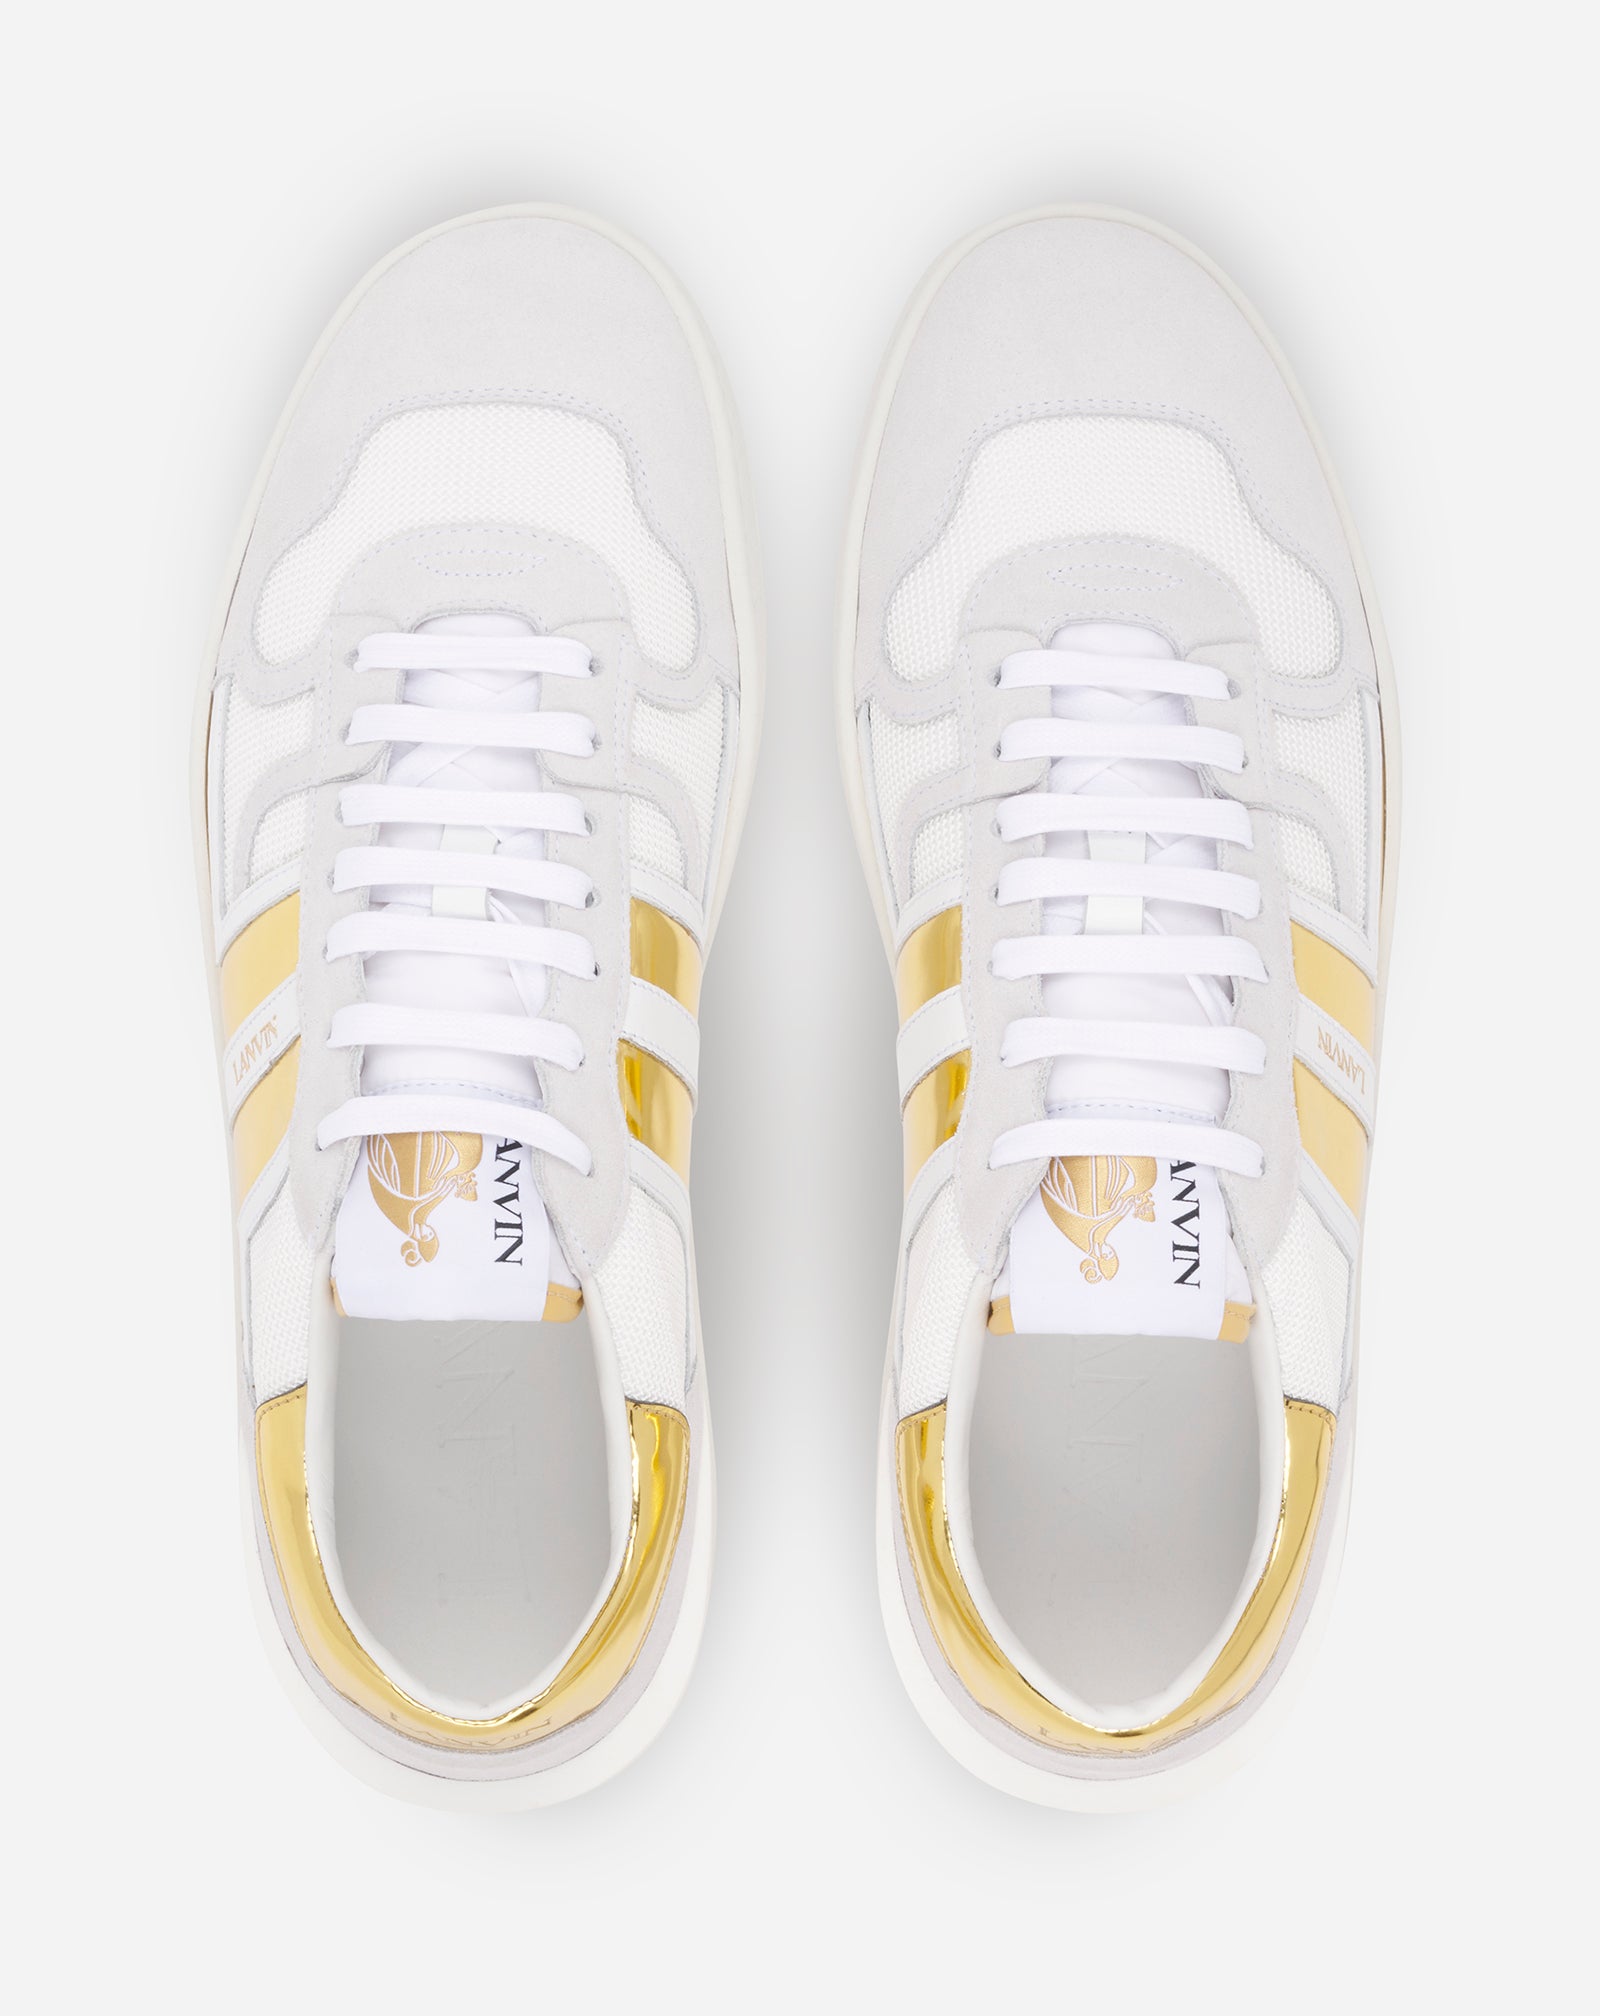 MESH CLAY SNEAKERS, WHITE/GOLD